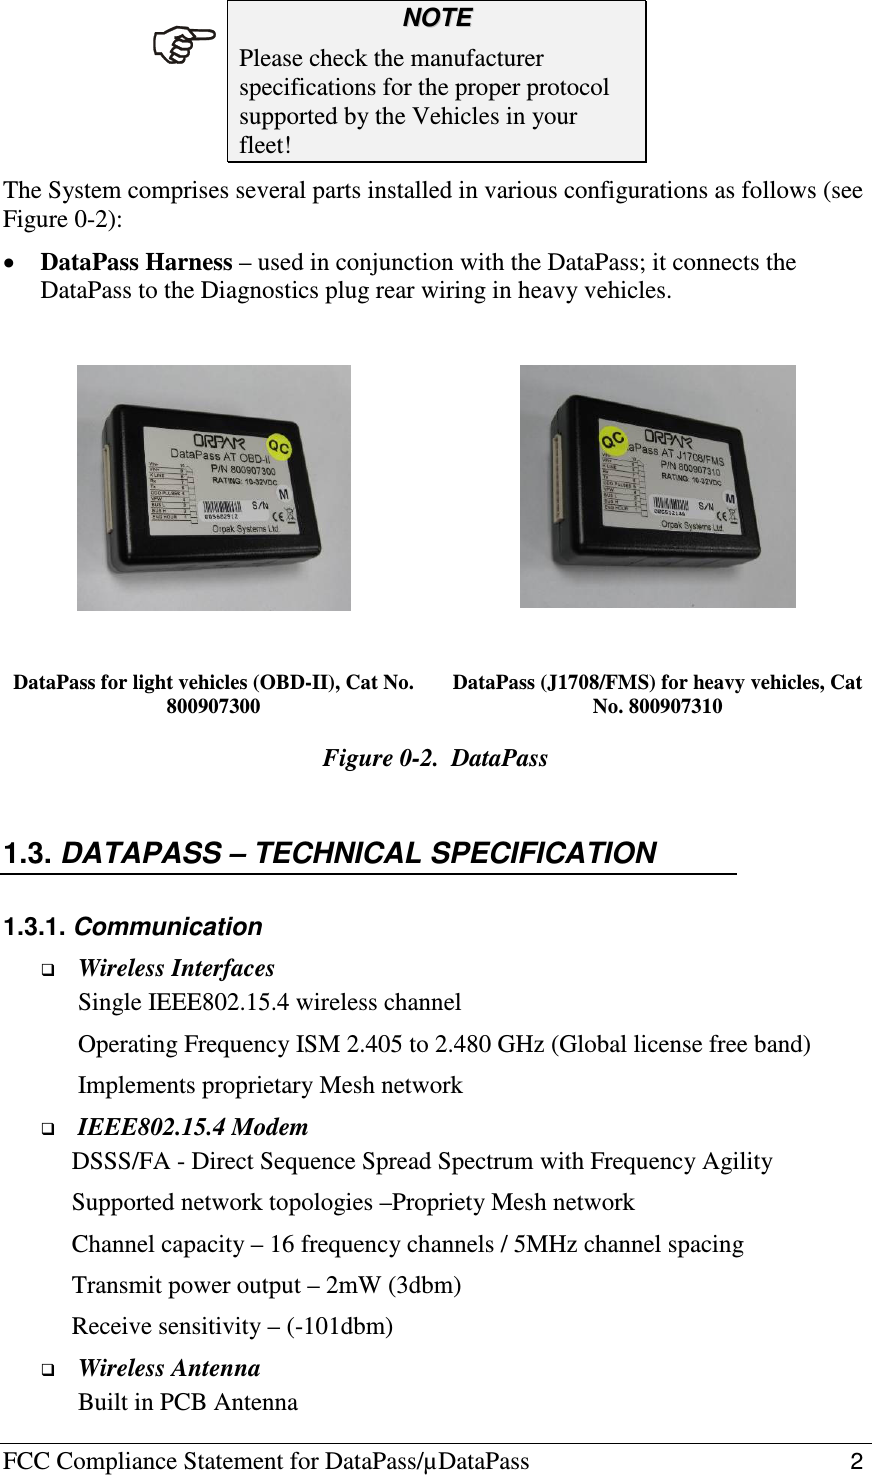 FCC Compliance Statement for DataPass/µDataPass                                                   2  NNOOTTEE  Please check the manufacturer specifications for the proper protocol supported by the Vehicles in your fleet! The System comprises several parts installed in various configurations as follows (see Figure  0-2): • DataPass Harness – used in conjunction with the DataPass; it connects the DataPass to the Diagnostics plug rear wiring in heavy vehicles.      DataPass for light vehicles (OBD-II), Cat No. 800907300 DataPass (J1708/FMS) for heavy vehicles, Cat No. 800907310 Figure  0-2.  DataPass  1.3. DATAPASS – TECHNICAL SPECIFICATION 1.3.1. Communication  Wireless Interfaces Single IEEE802.15.4 wireless channel Operating Frequency ISM 2.405 to 2.480 GHz (Global license free band) Implements proprietary Mesh network  IEEE802.15.4 Modem      DSSS/FA - Direct Sequence Spread Spectrum with Frequency Agility      Supported network topologies –Propriety Mesh network      Channel capacity – 16 frequency channels / 5MHz channel spacing       Transmit power output – 2mW (3dbm)      Receive sensitivity – (-101dbm)  Wireless Antenna Built in PCB Antenna  